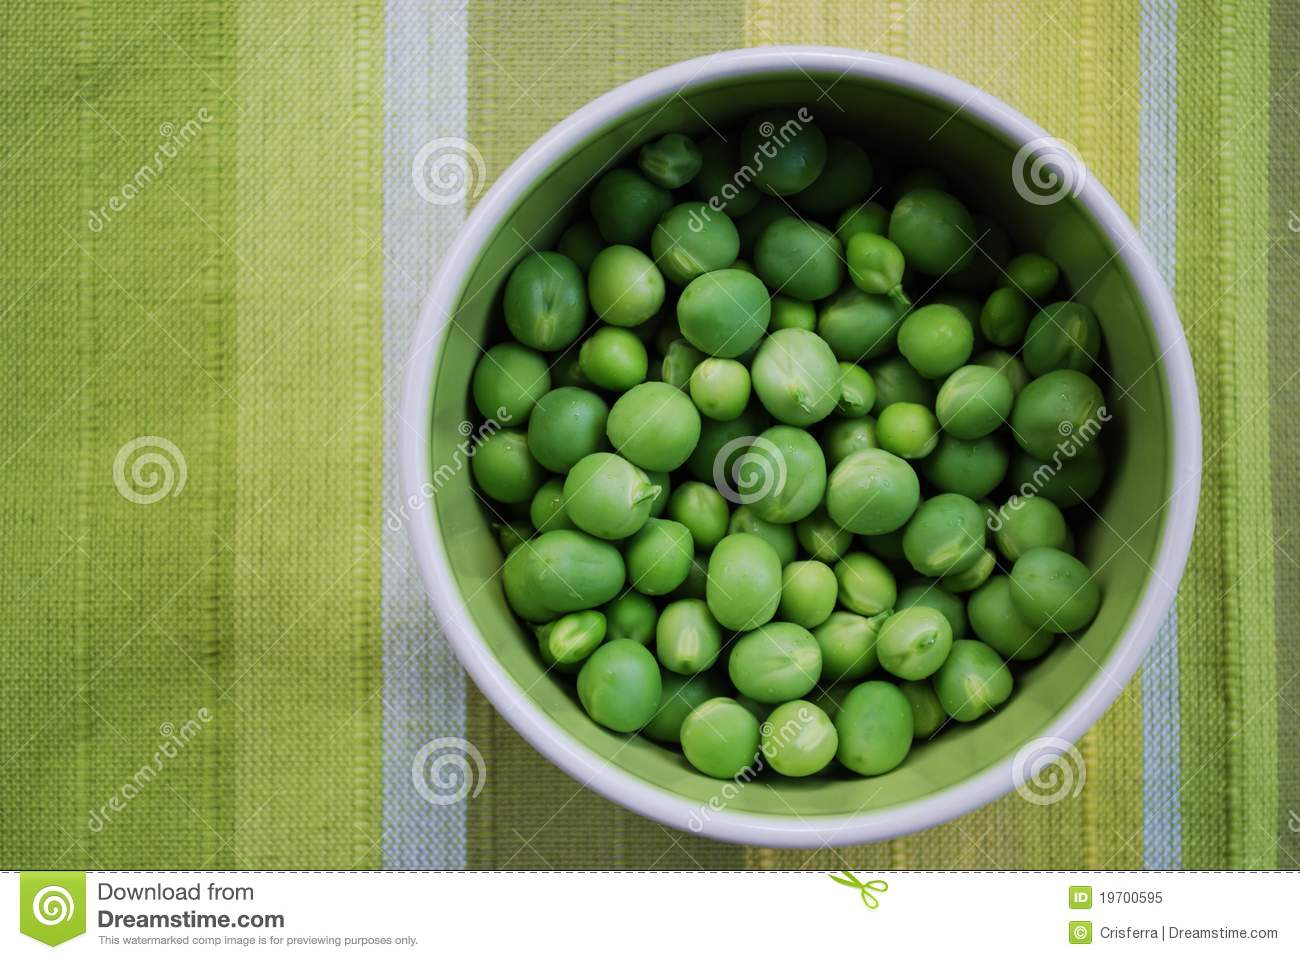 Ripe Sweet Green Peas In A Ceramic Bowl On Green Striped Background